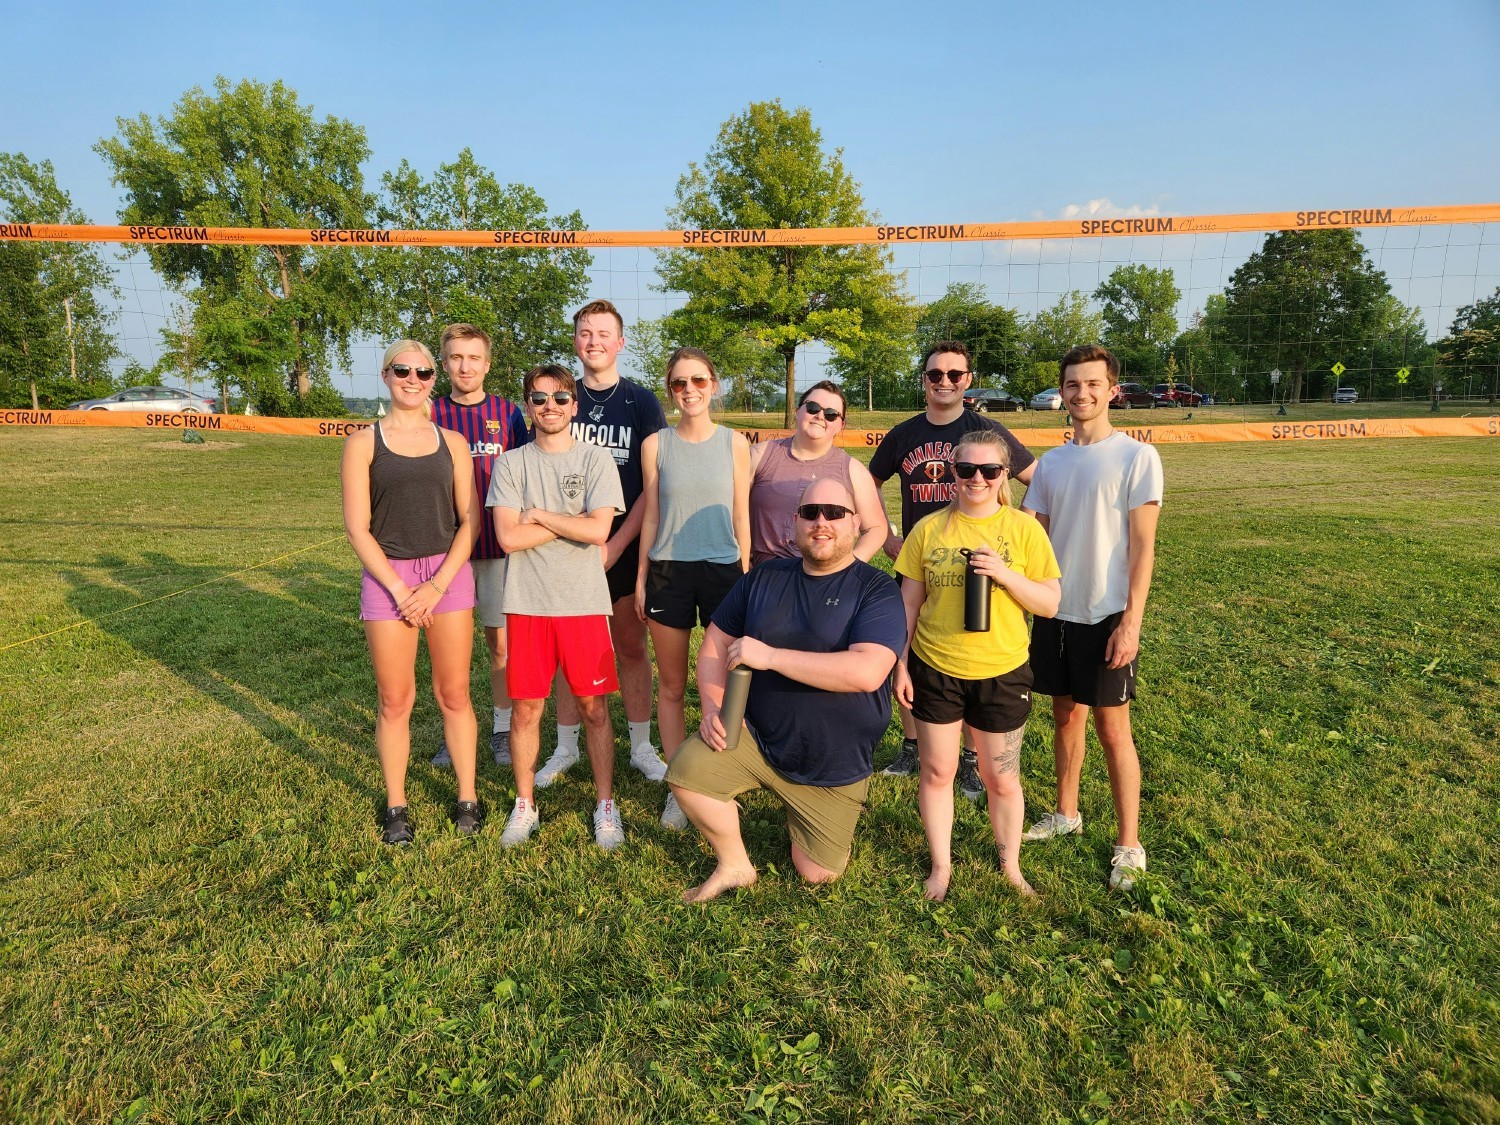 JLG’s Minneapolis team works hard and plays hard – from the volleyball court to our local trails and festivals.  